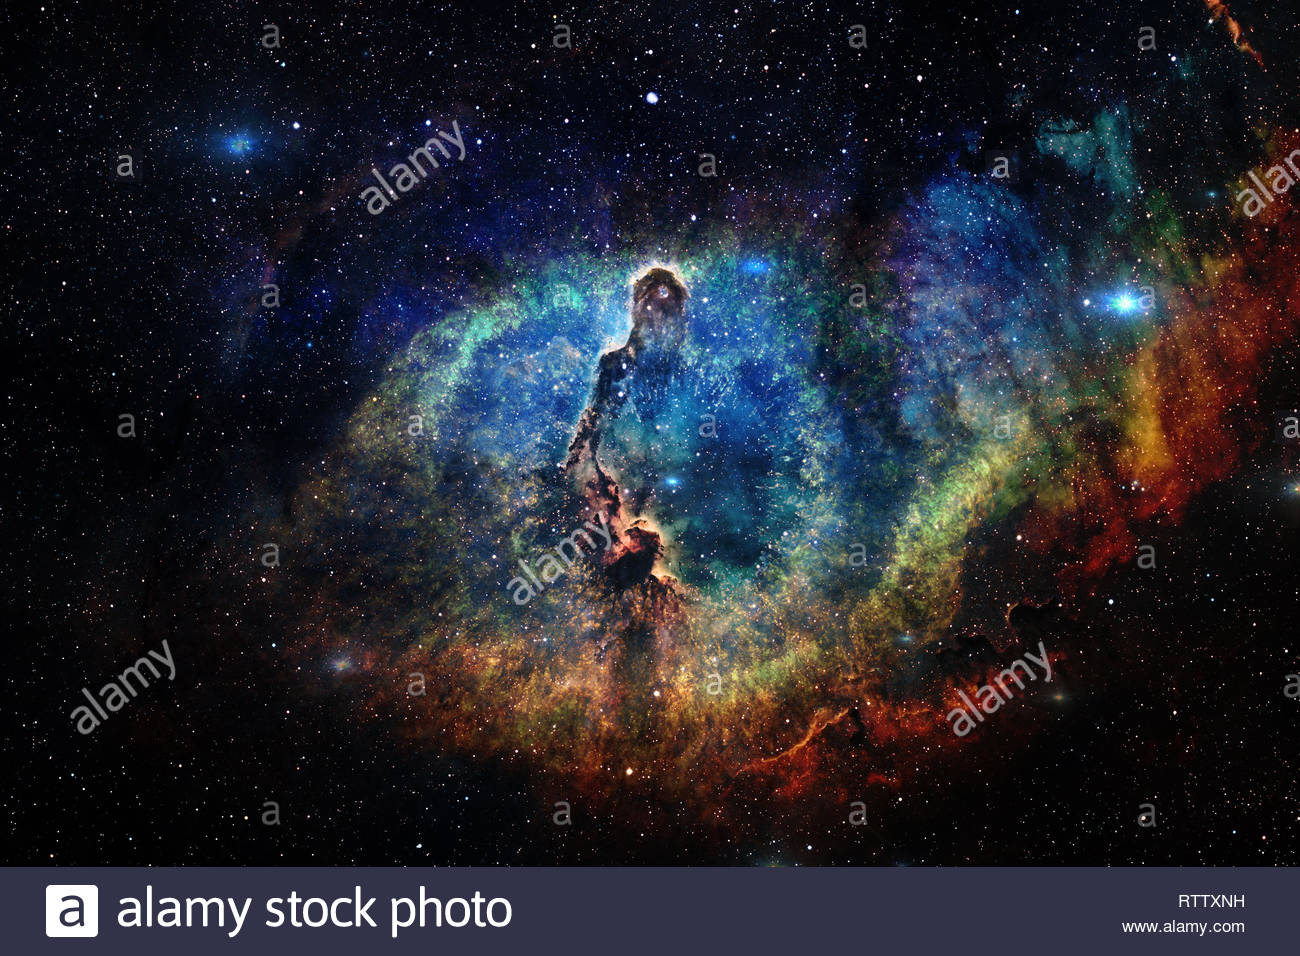 Science Fiction Space Wallpaper Galaxies And Nebulas In Awesome